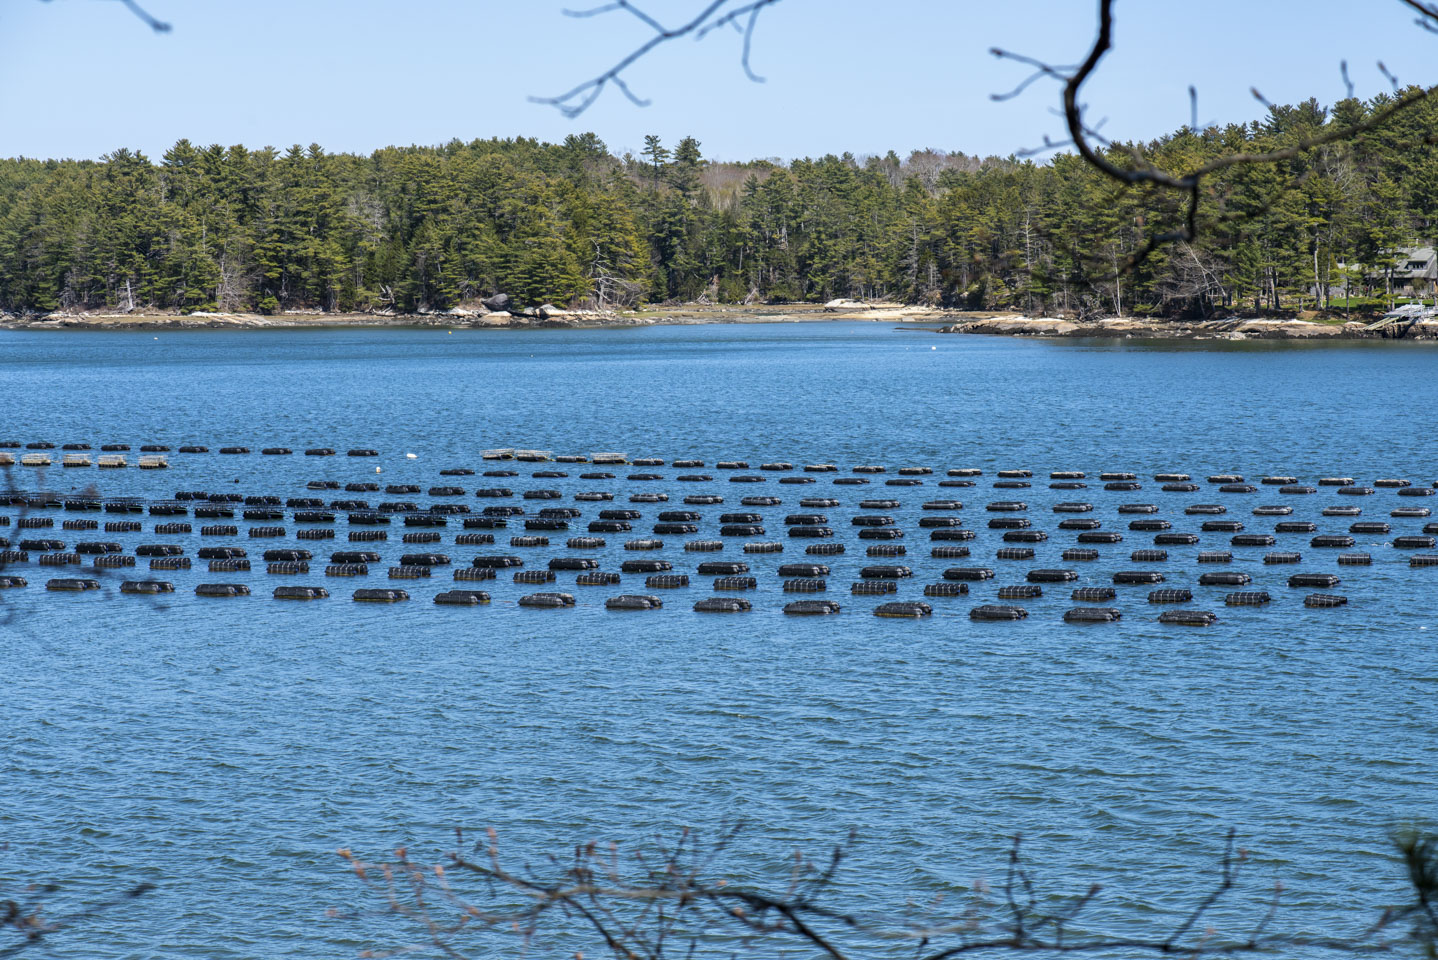 oyster farm cages in the river